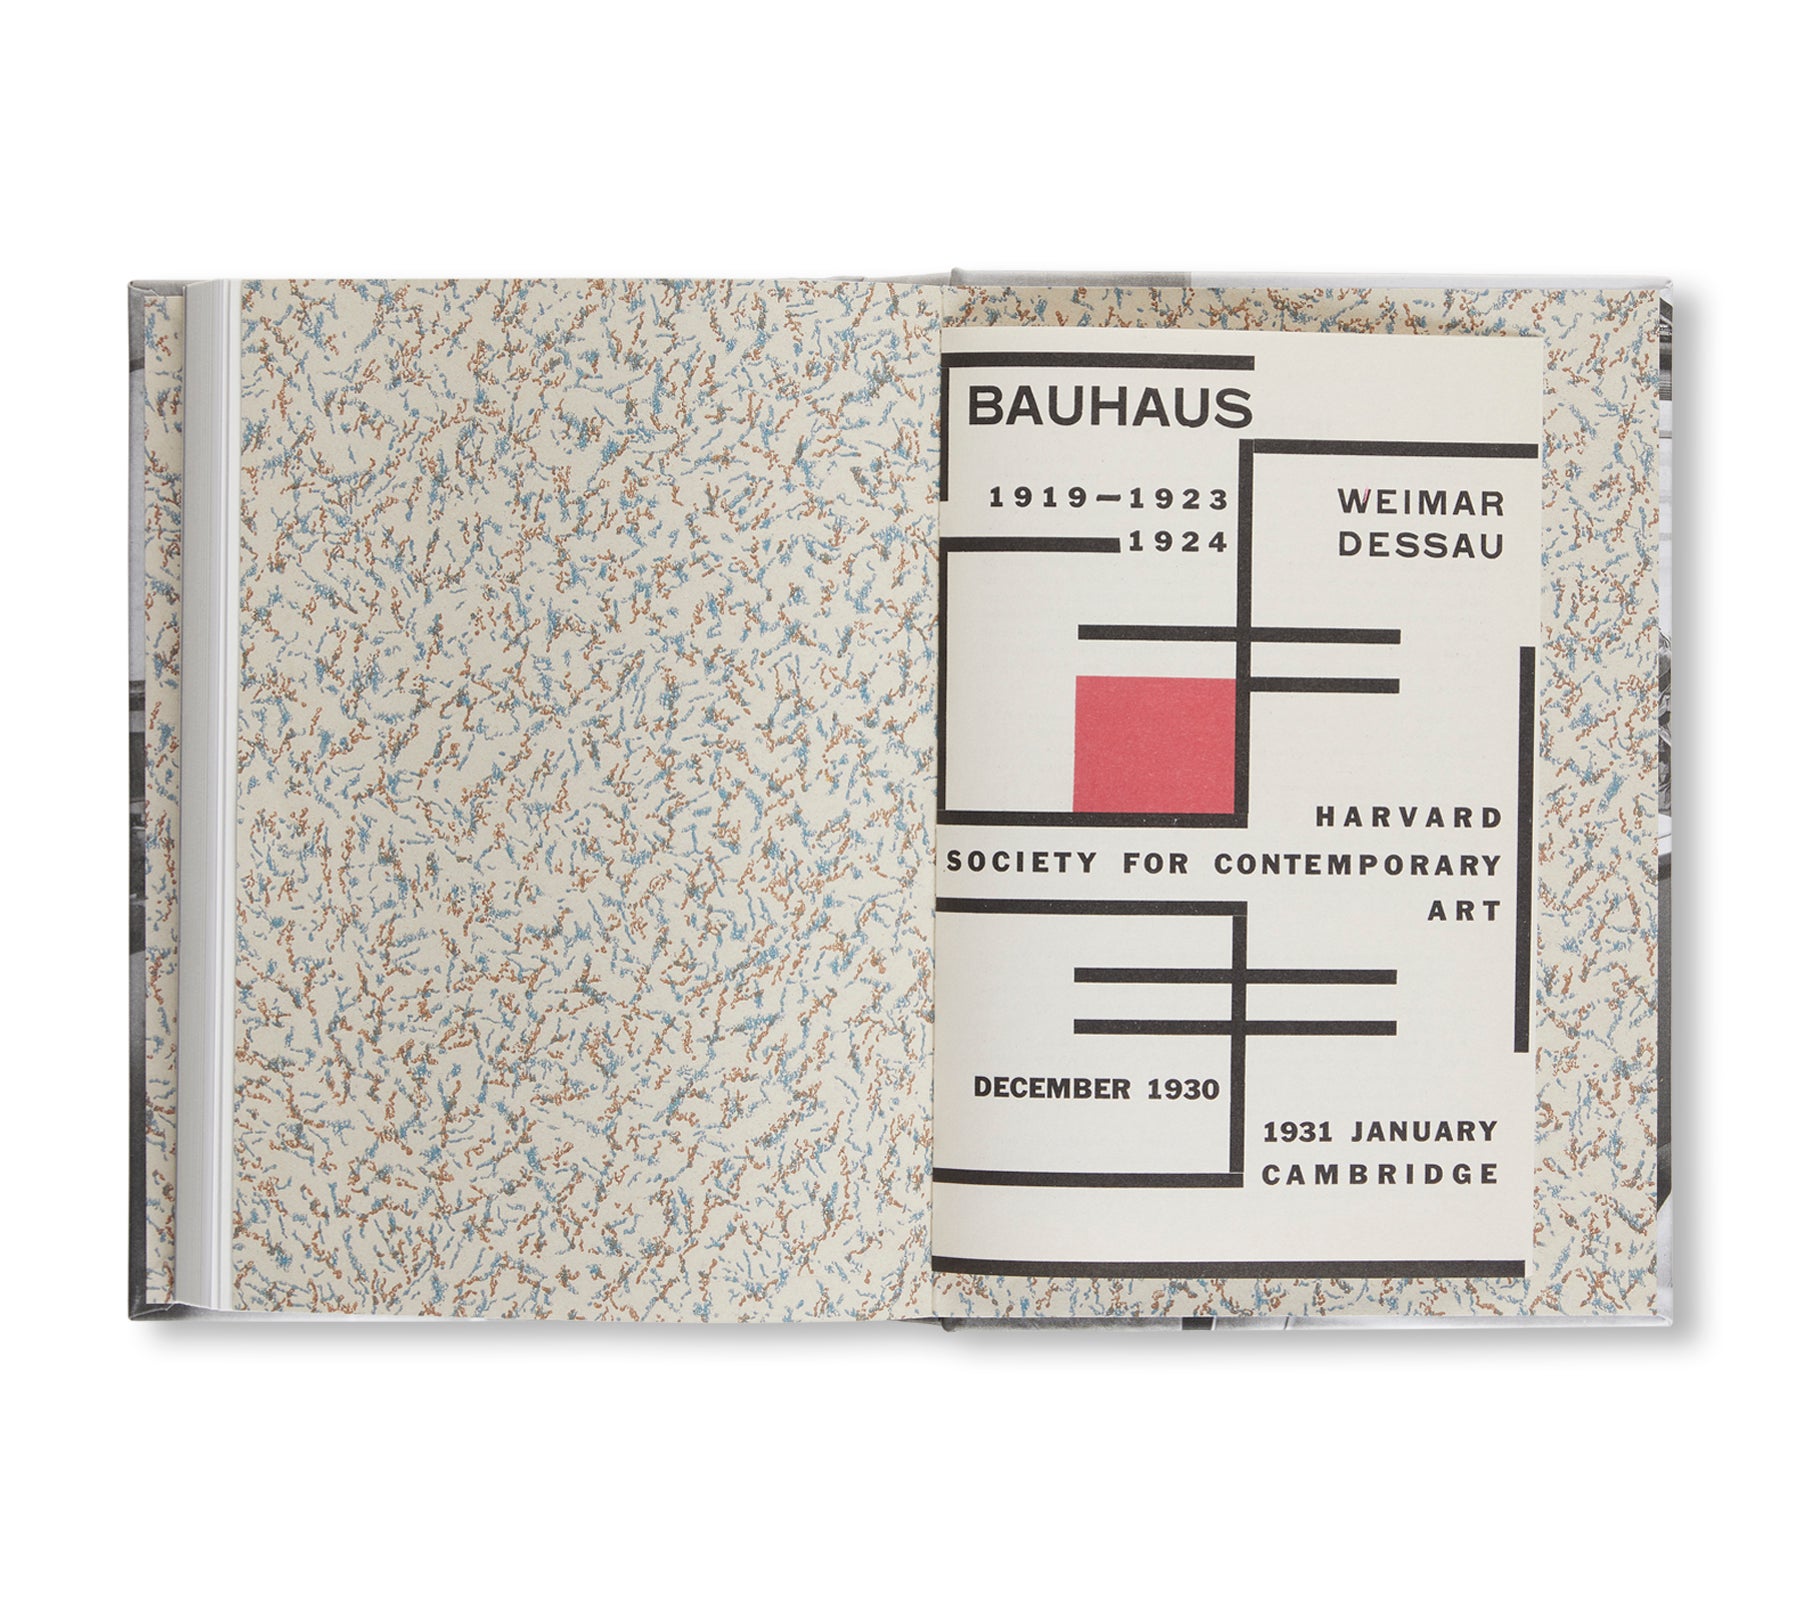 OBJECT LESSONS: THE BAUHAUS AND HARVARD